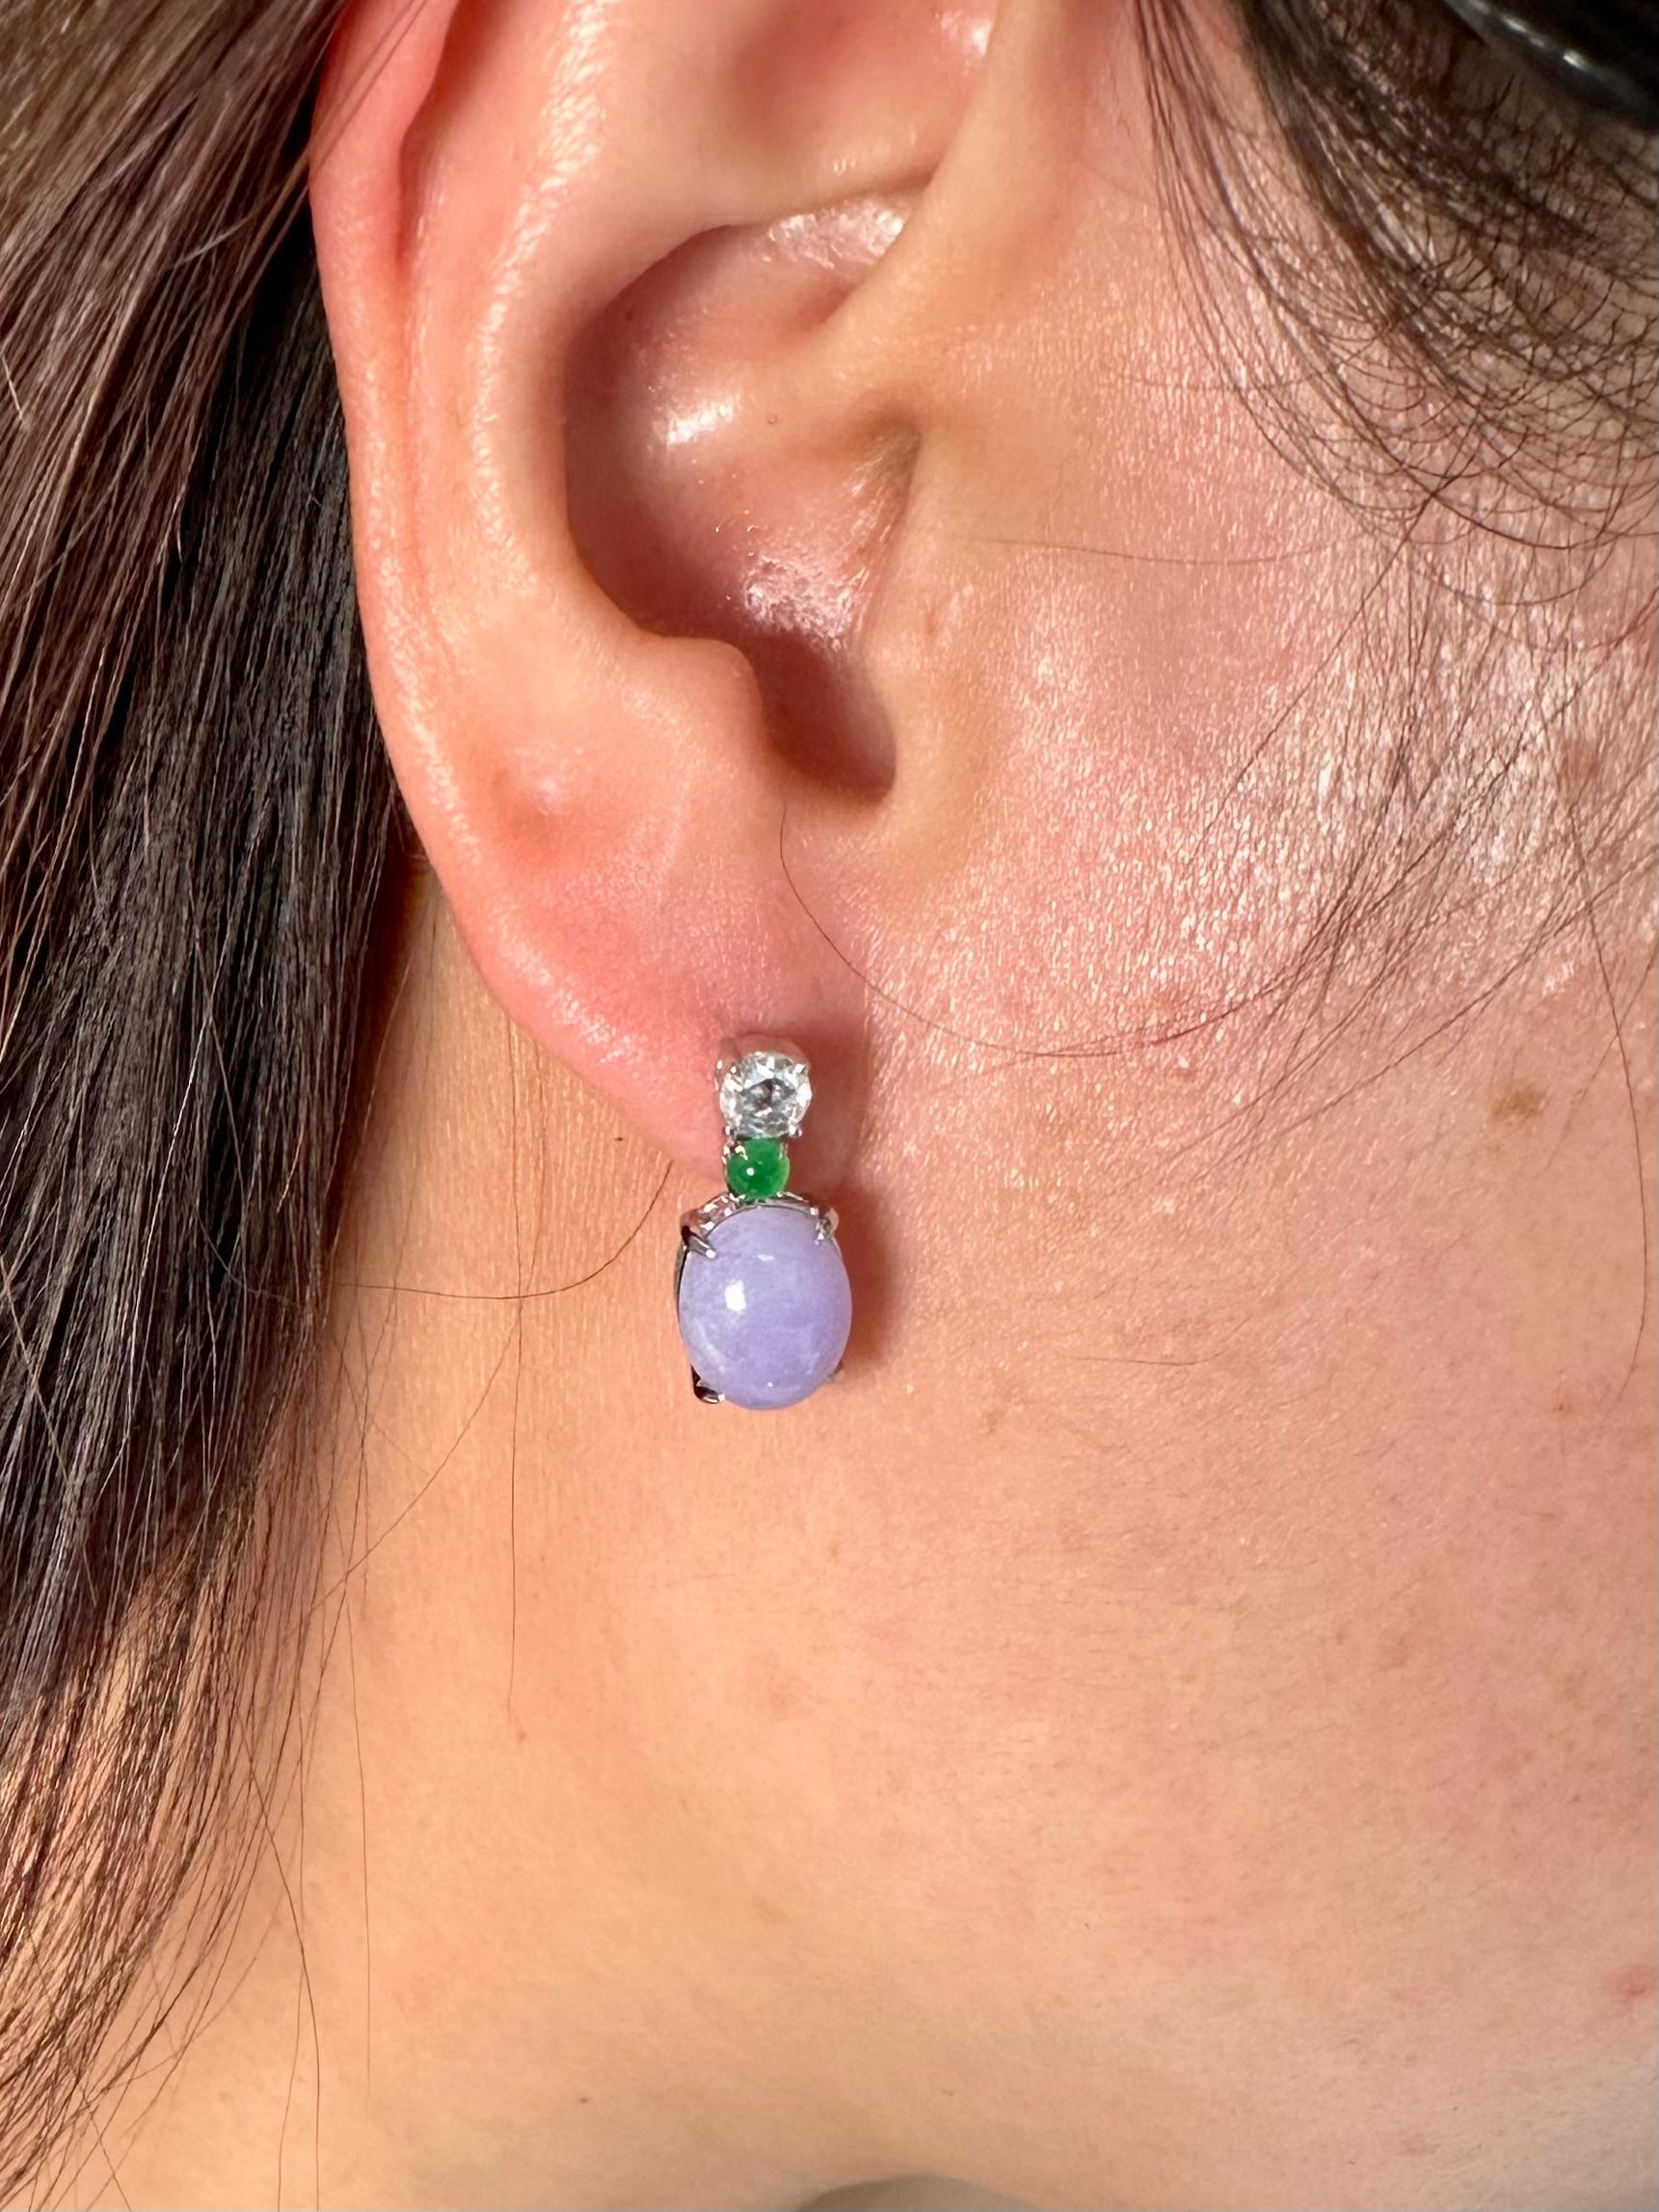 Please check out the HD video. This is a very special pair of drop earrings that are well designed with superb color combination. The lavender / purple jades in these earrings are certified to be natural. The earrings are set in 18k white gold. The